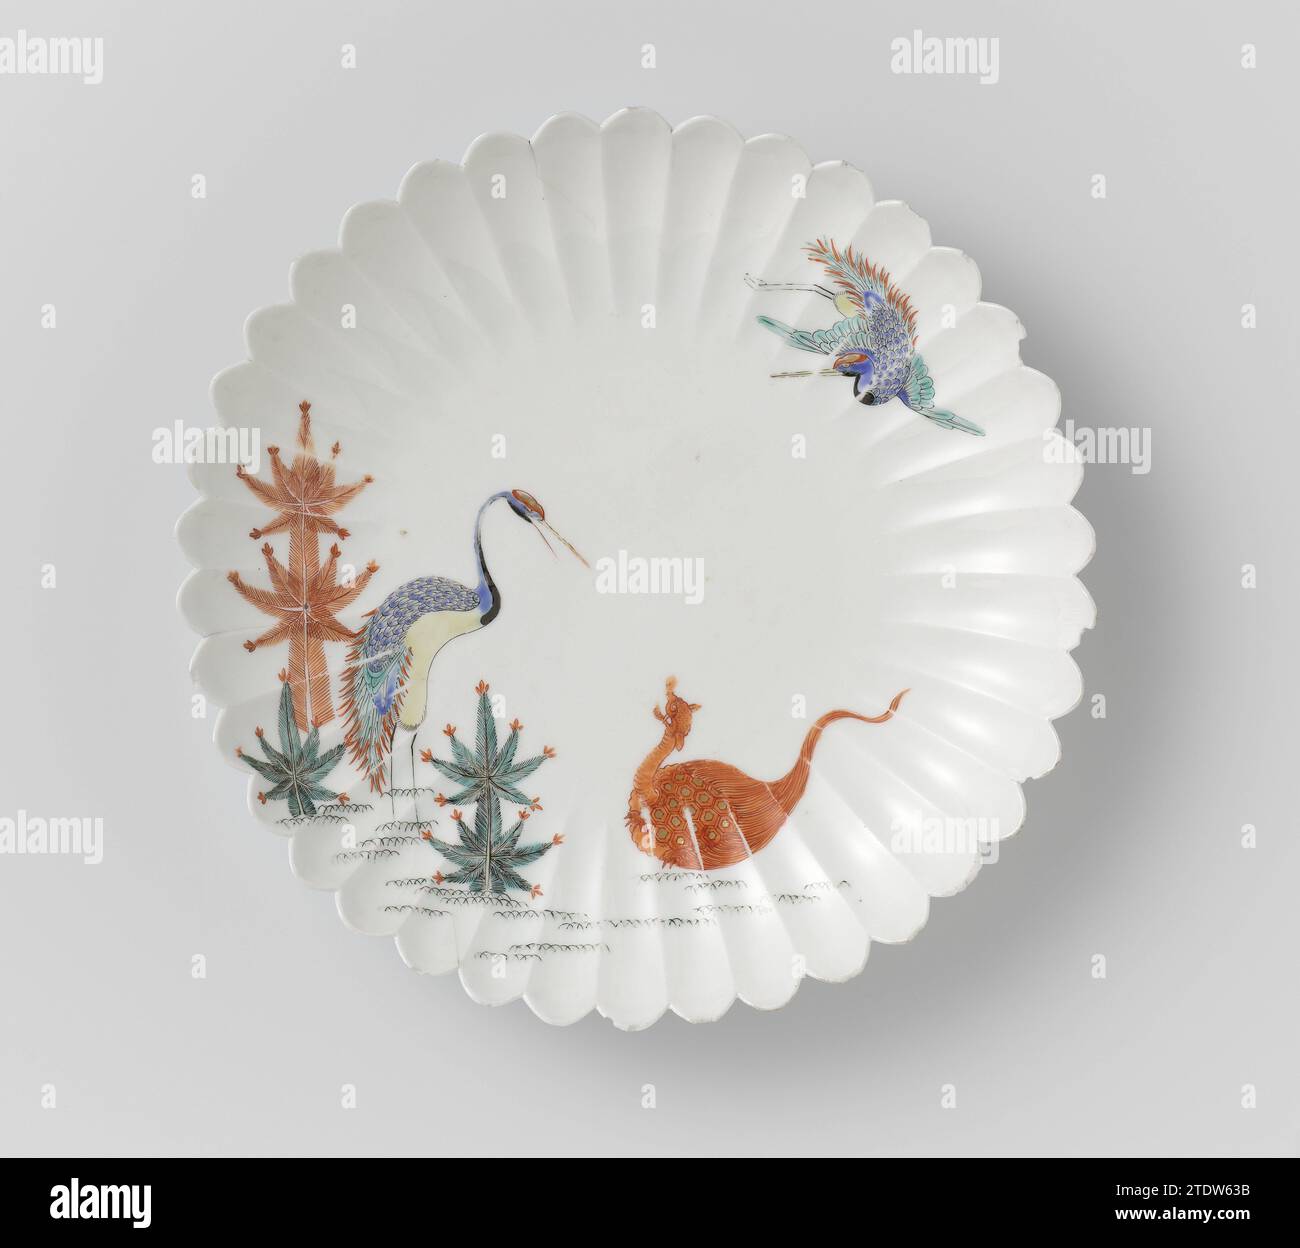 Fluted saucer-dish with cranes, minogame and pine shoots, anonymous, c. 1670 - c. 1690 Scale of porcelain with a ribbed wall and lobed edge, painted on the glaze in blue, red, green, yellow, black and gold. On the flat a standing crane between pine shoots, looking at a minog game on the floor. A second crane in the air. Some chips in the edge. Arita, Kakiemon. Japan porcelain. glaze. gold (metal) painting / gilding / vitrification Scale of porcelain with a ribbed wall and lobed edge, painted on the glaze in blue, red, green, yellow, black and gold. On the flat a standing crane between pine sho Stock Photo